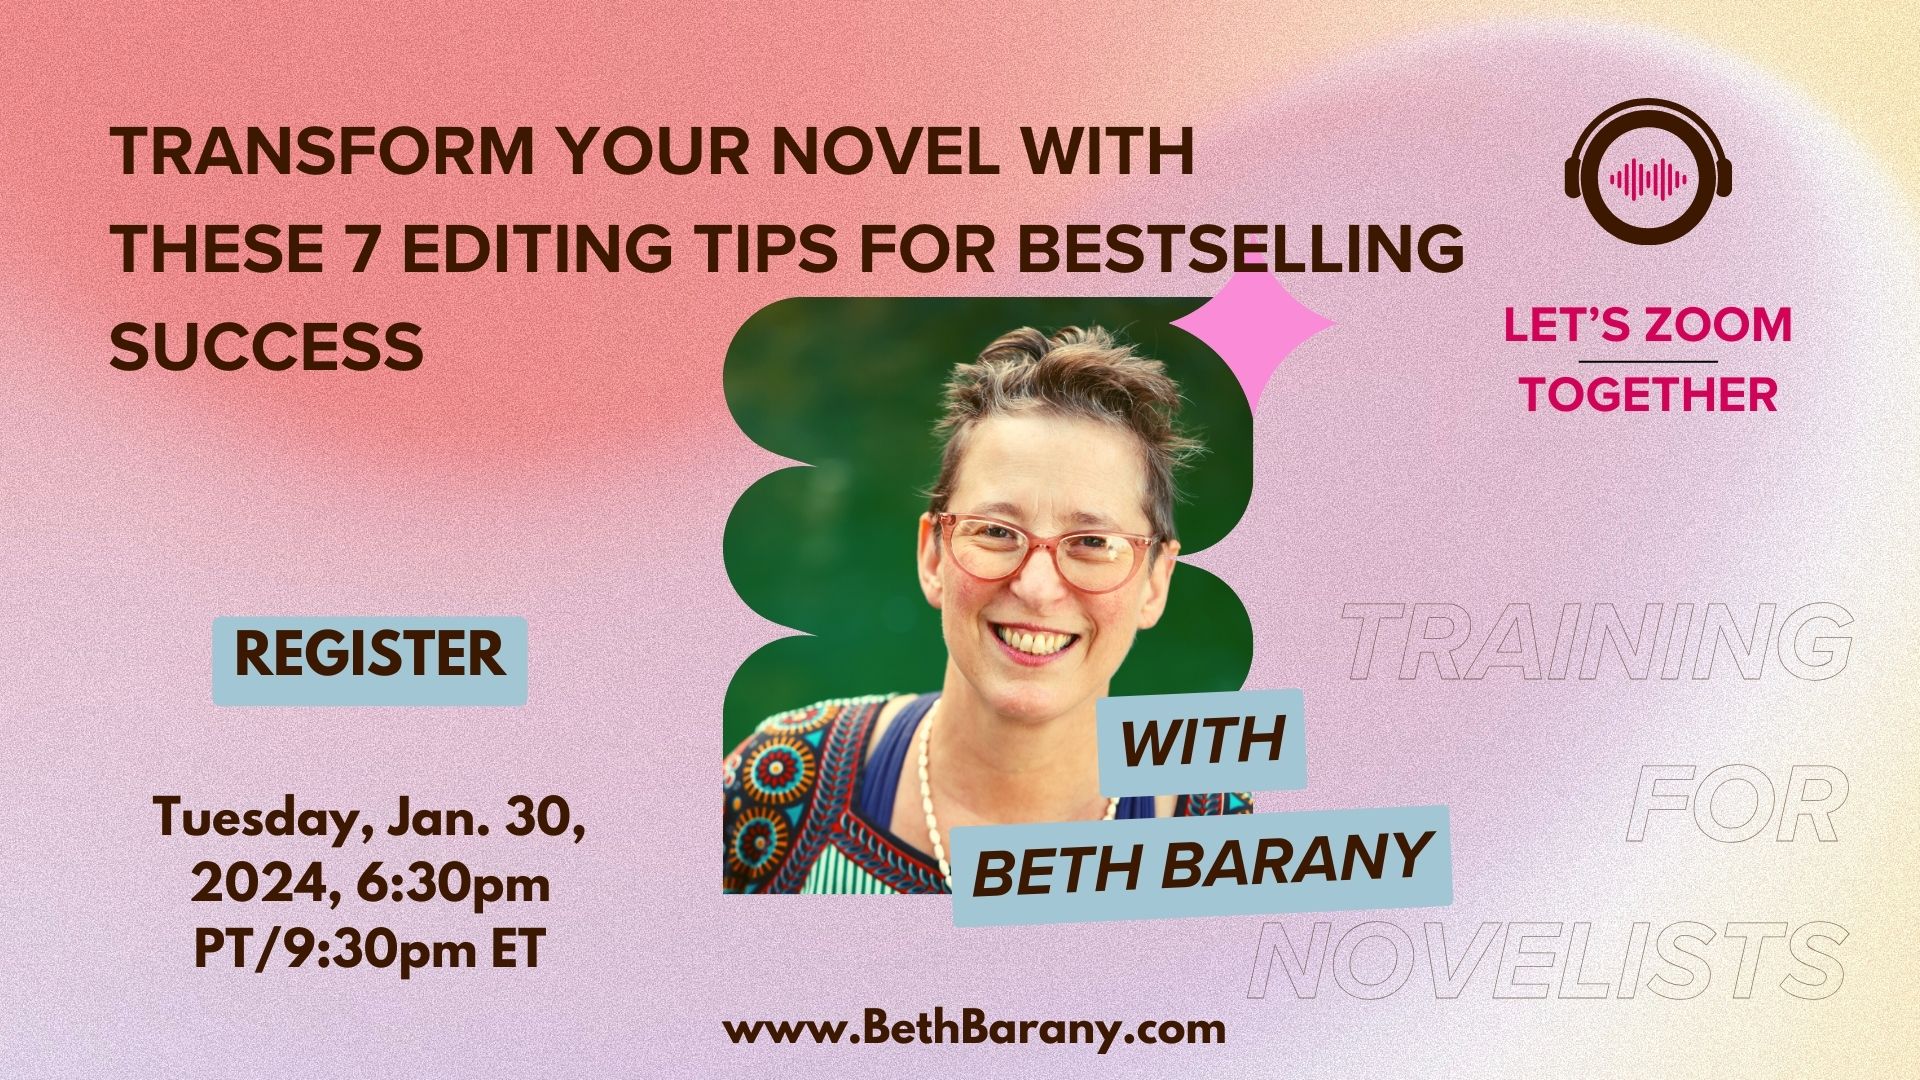  “Transform Your Novel with These 7 Editing Tips for Bestselling Success“ with Beth Barany, zoom training webinar